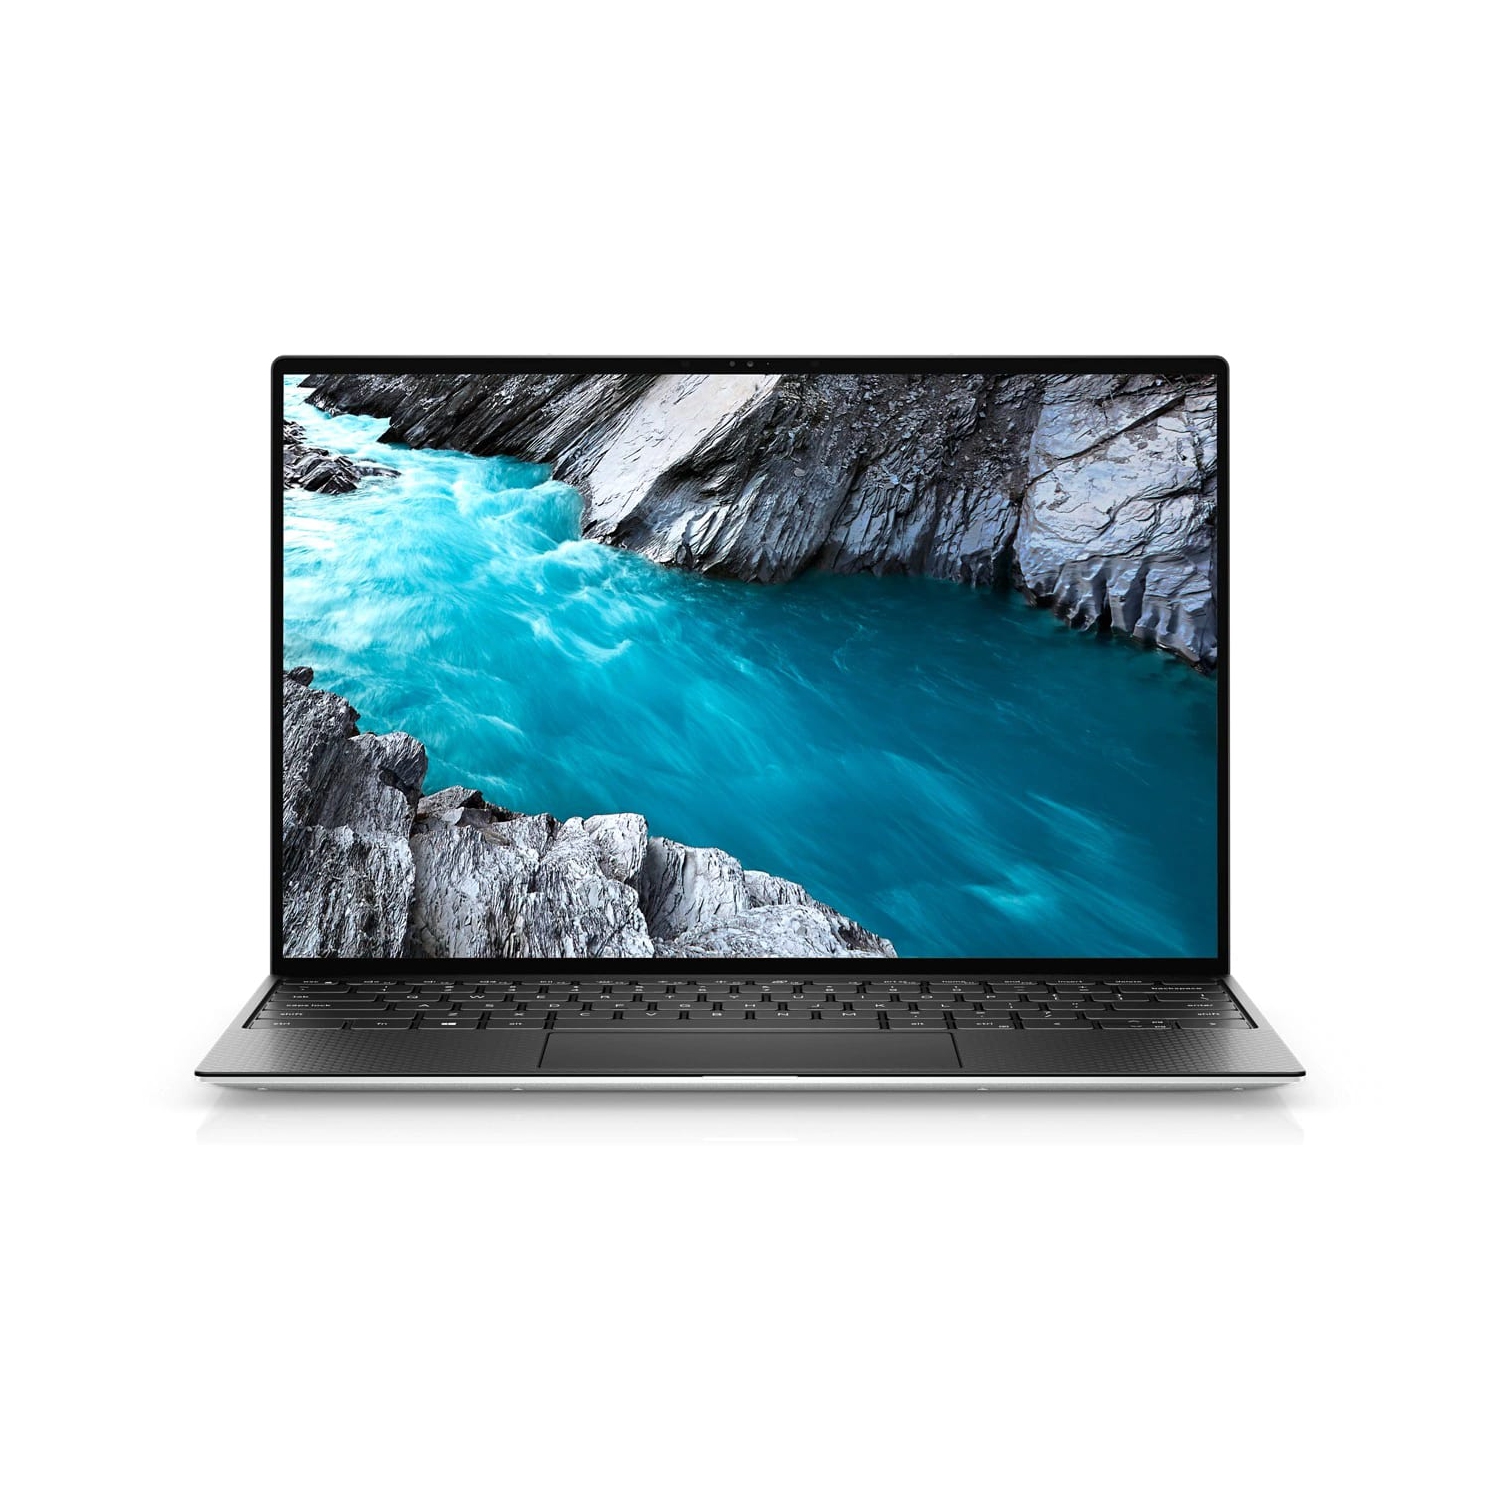 Refurbished (Excellent) - Dell XPS 13 9310 Laptop (2020) | 13.4" 4K Touch | Core i7 - 1TB SSD - 32GB RAM | 4 Cores @ 4.4 GHz - 11th Gen CPU Certified Refurbished